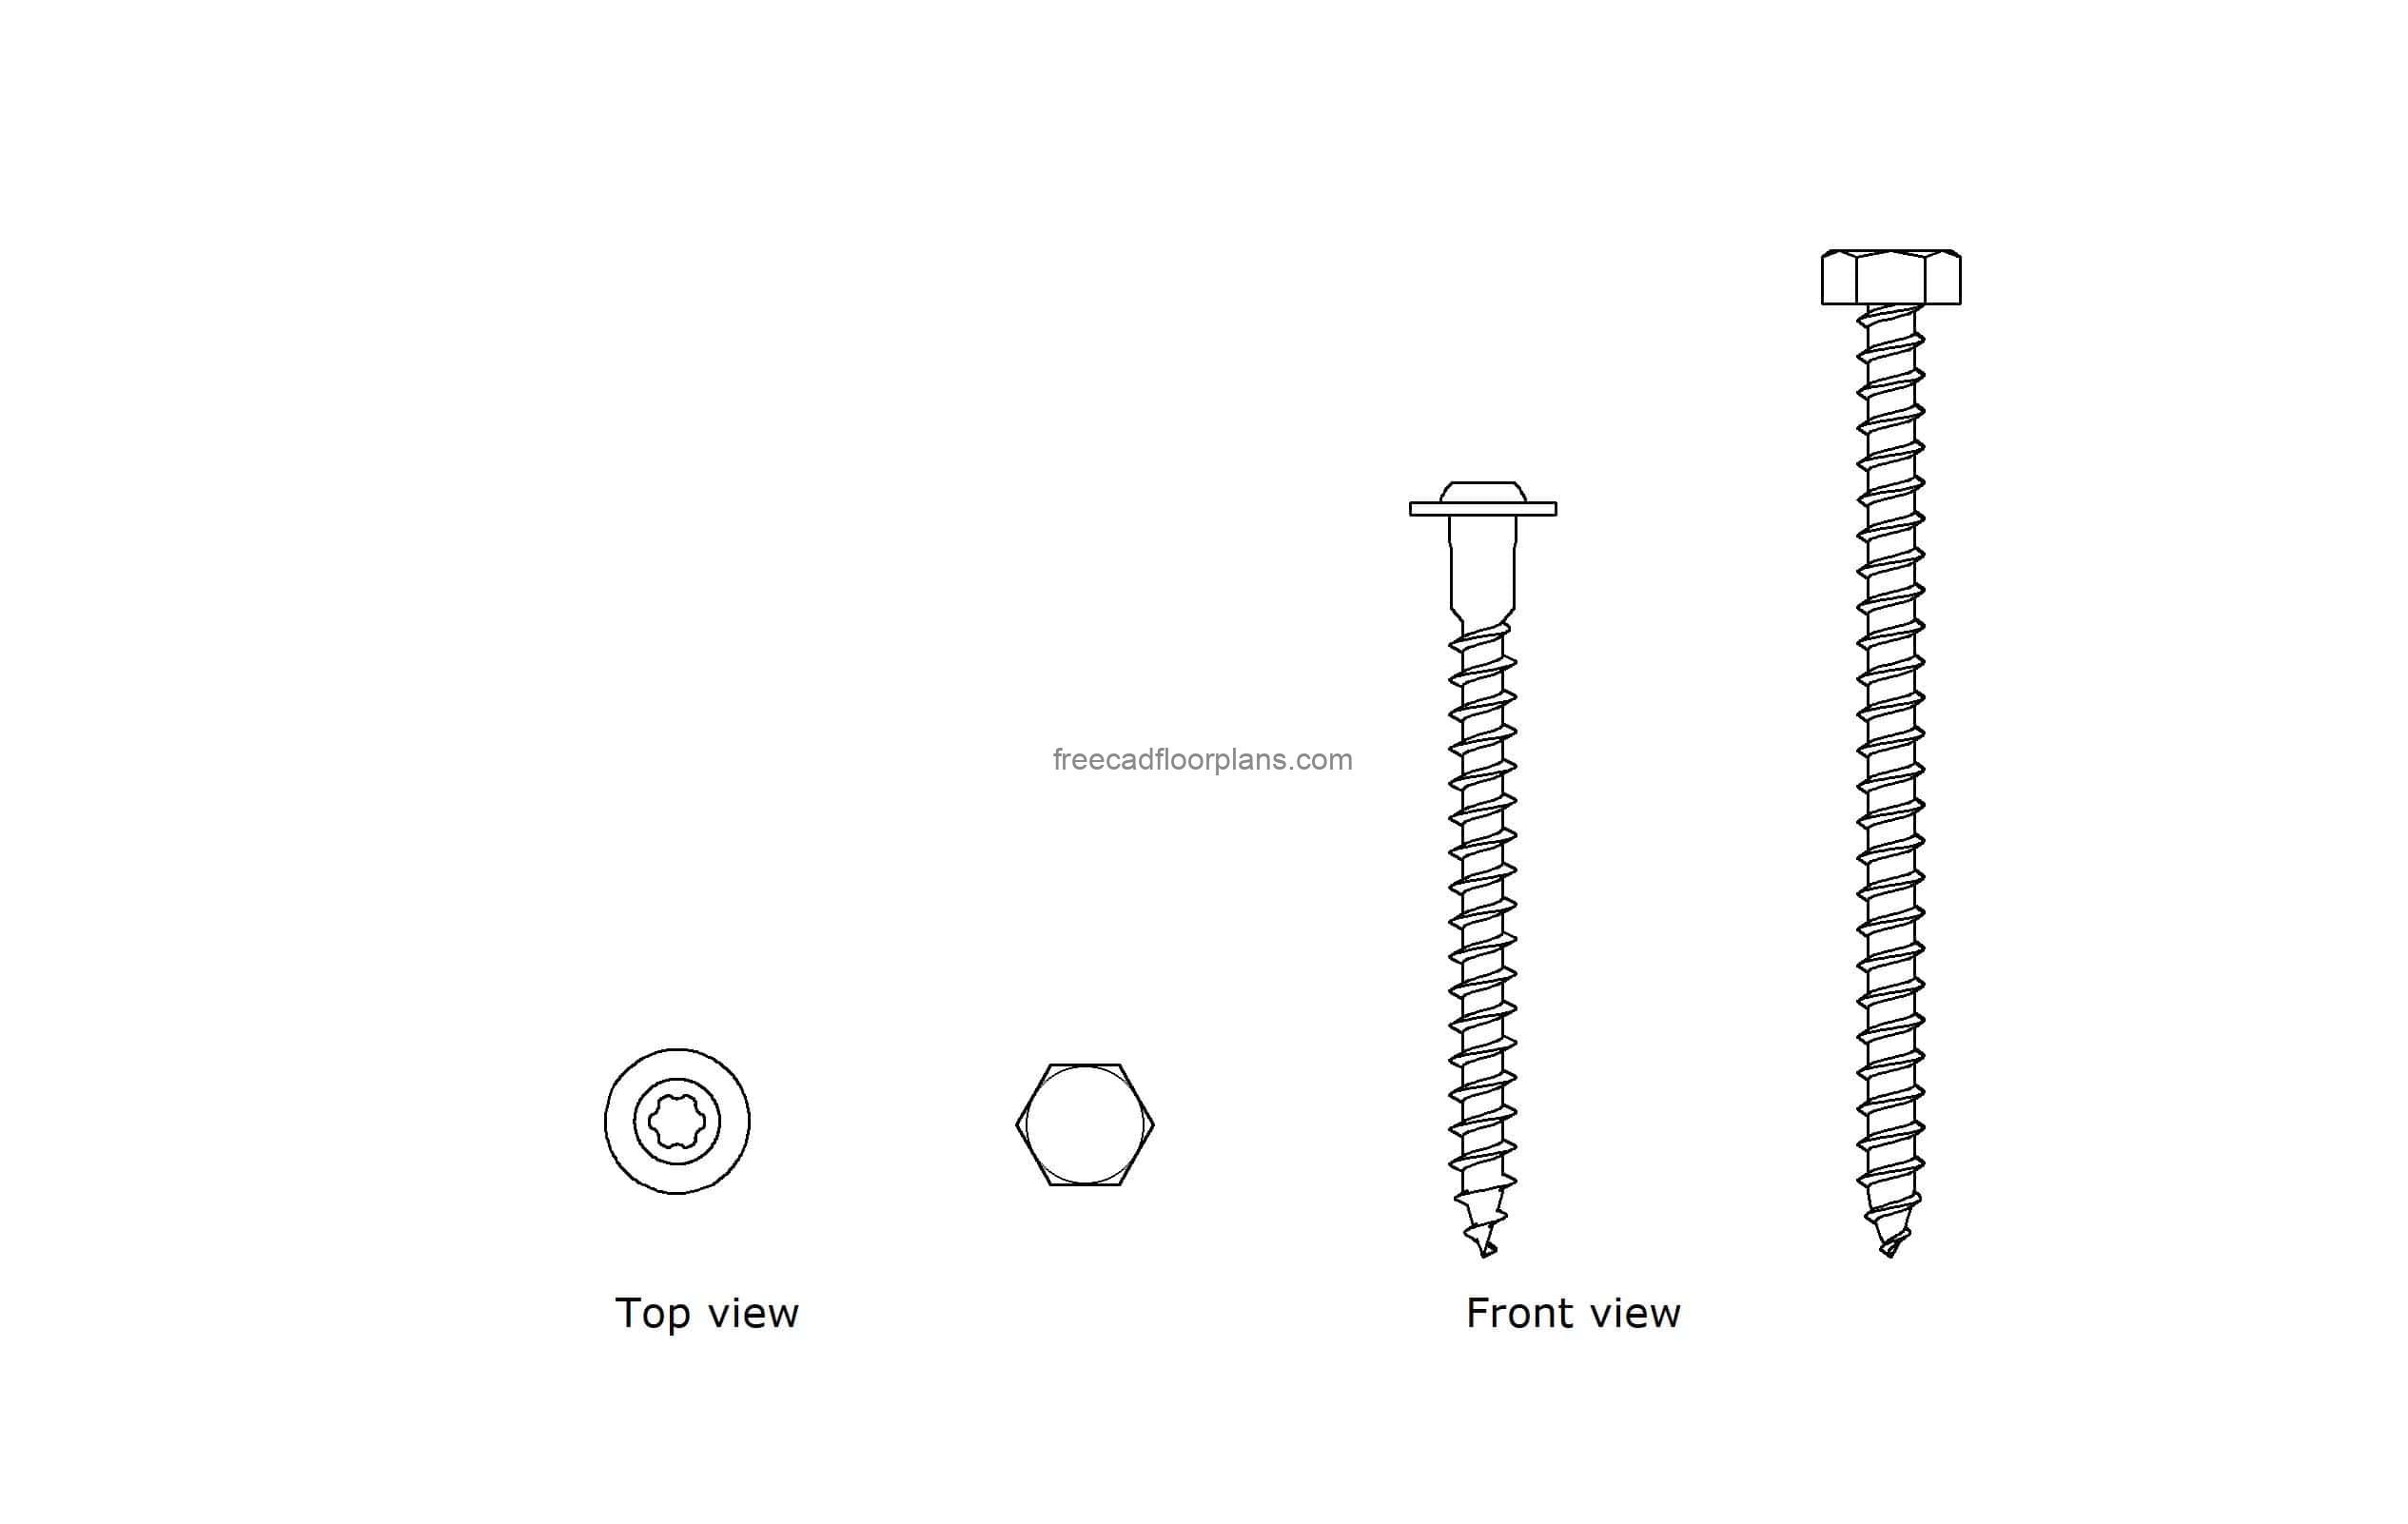 autocad drawing of different lag screws, 2d plan and elevation 2d views, dwg file for free download